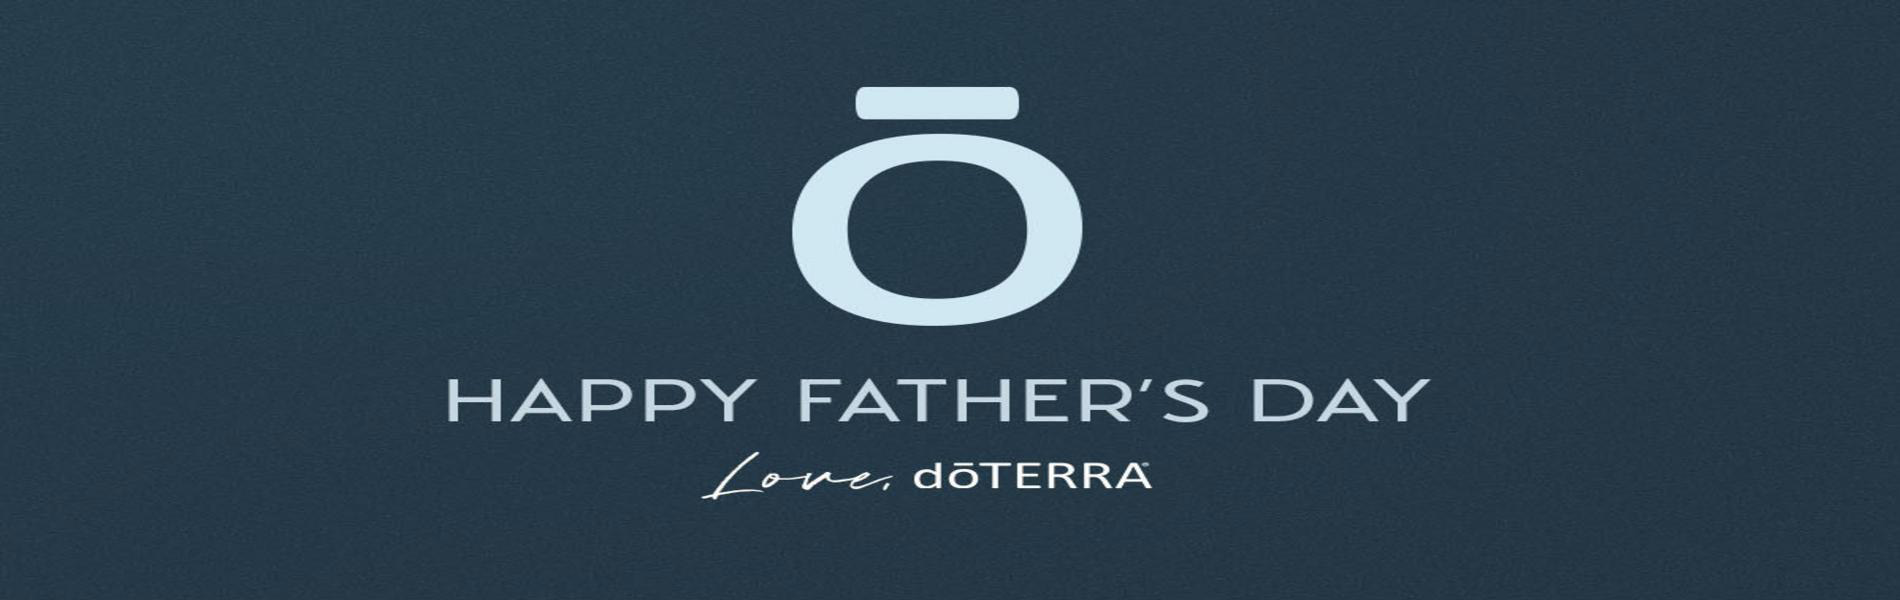 Banner that says Happy Father's day